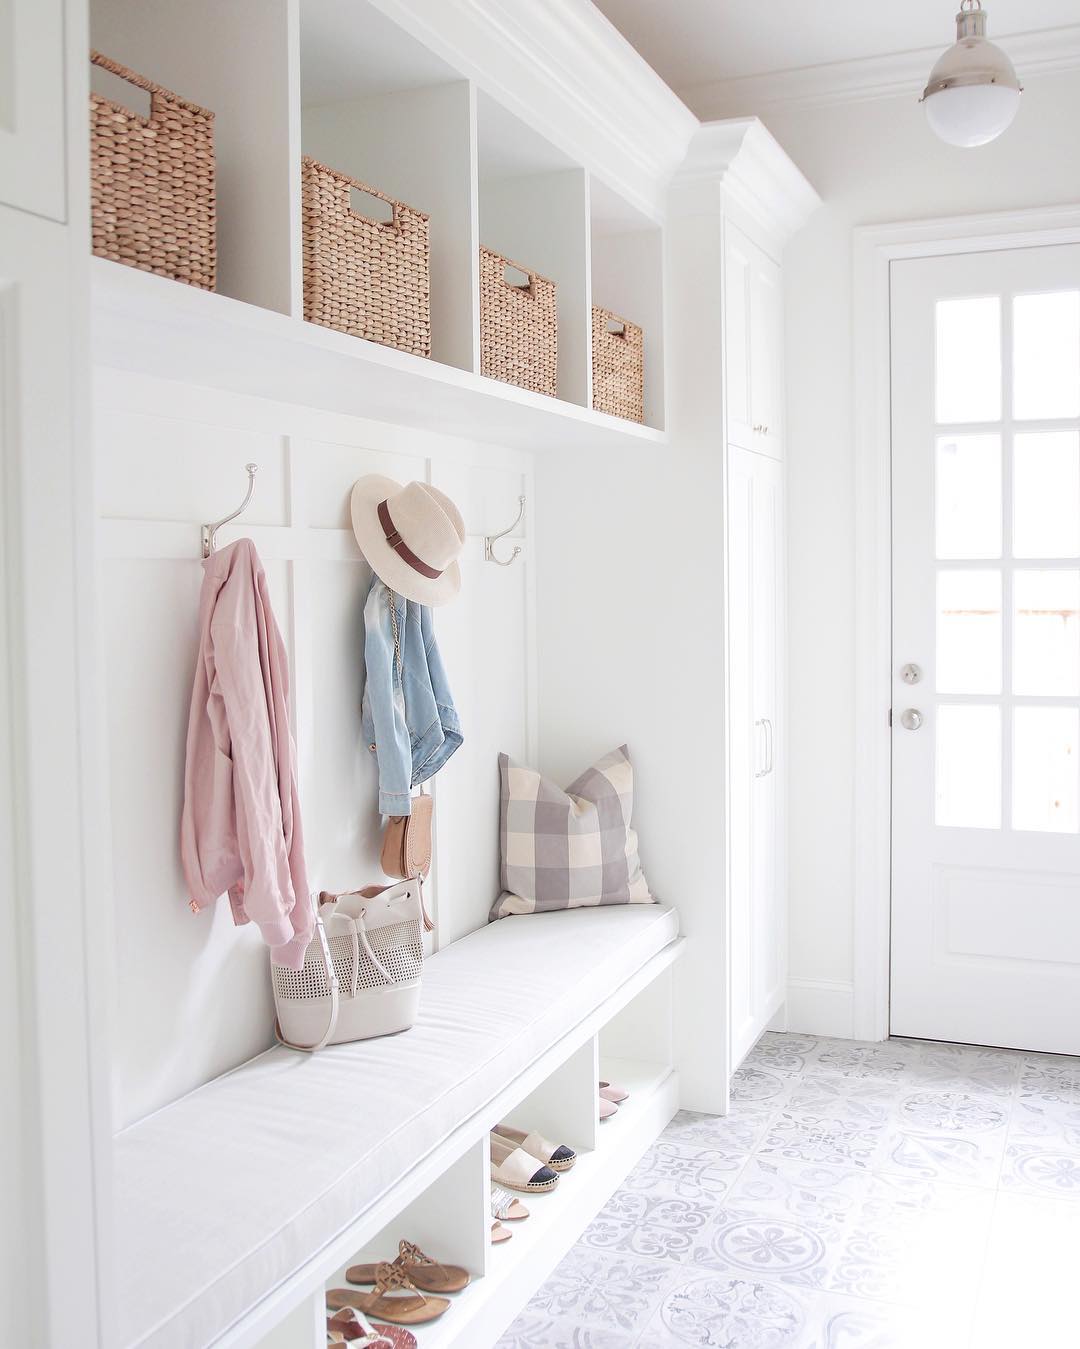 Clean, white mudroom. Photo by Instagram user @jseveryday